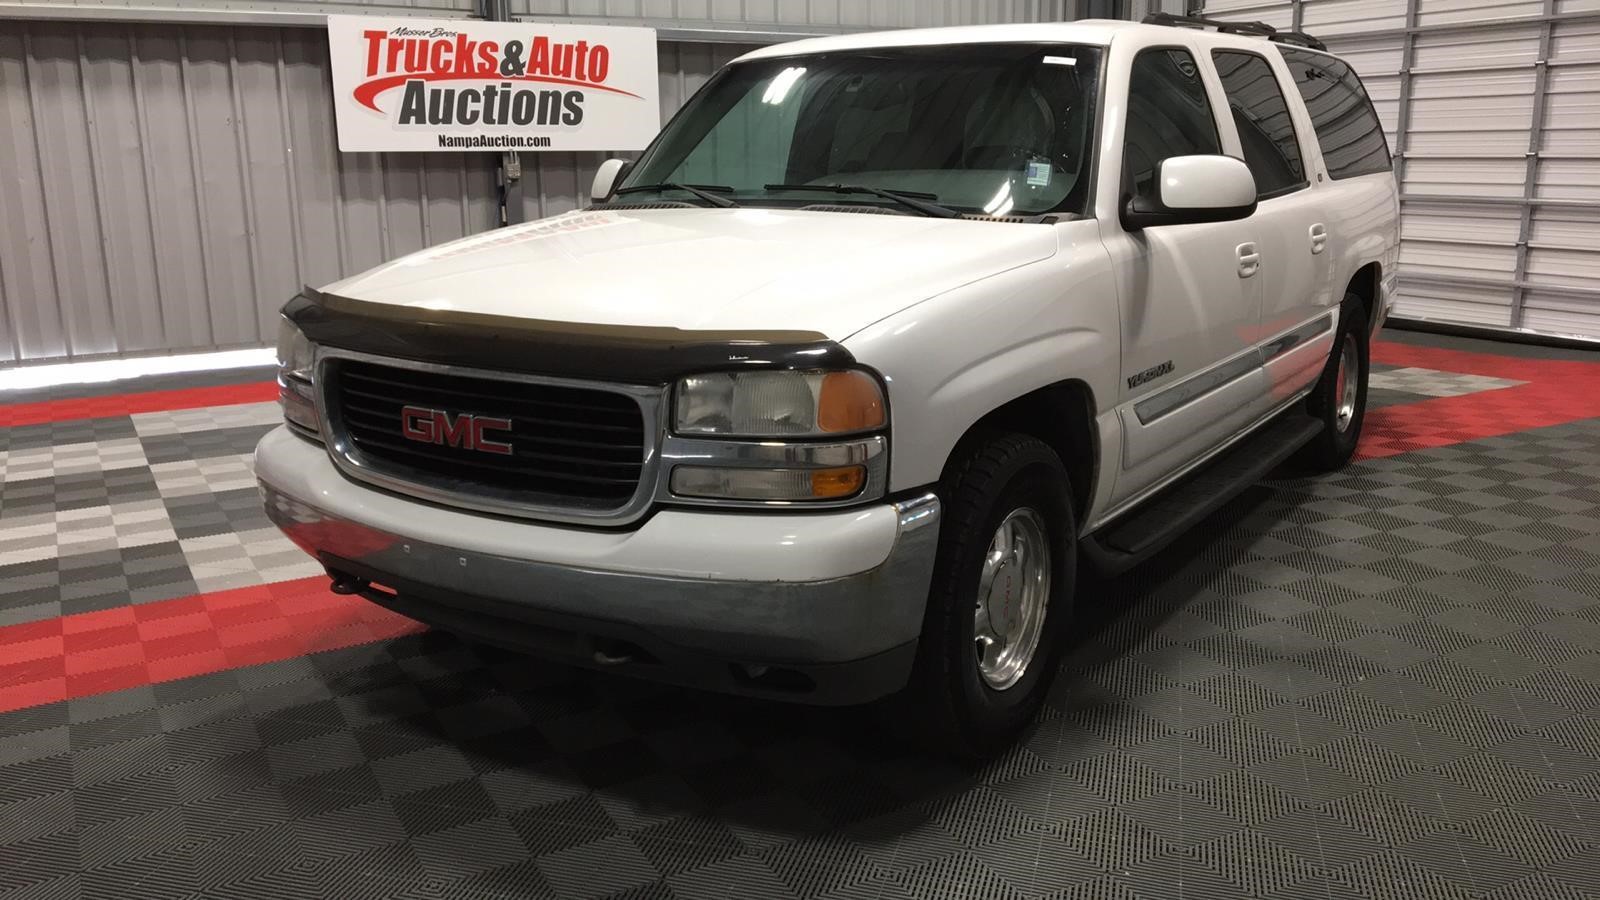 102617 Trucks & Auto Online Only Auction